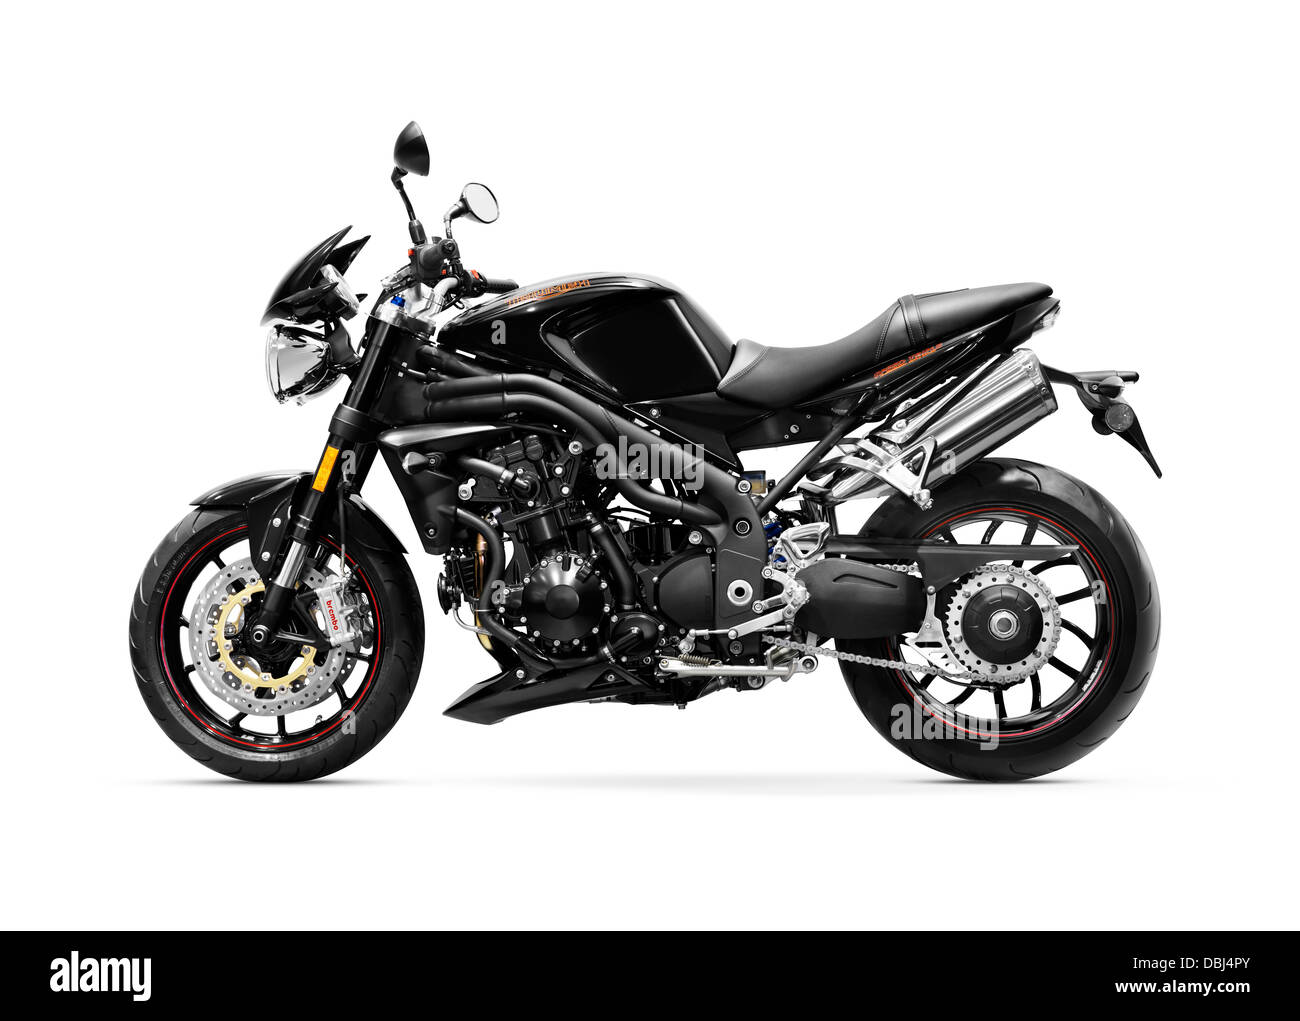 Black 2010 Triumph Speed Triple sport bike motorcycle 15th anniversary special edition isolated on white background Stock Photo